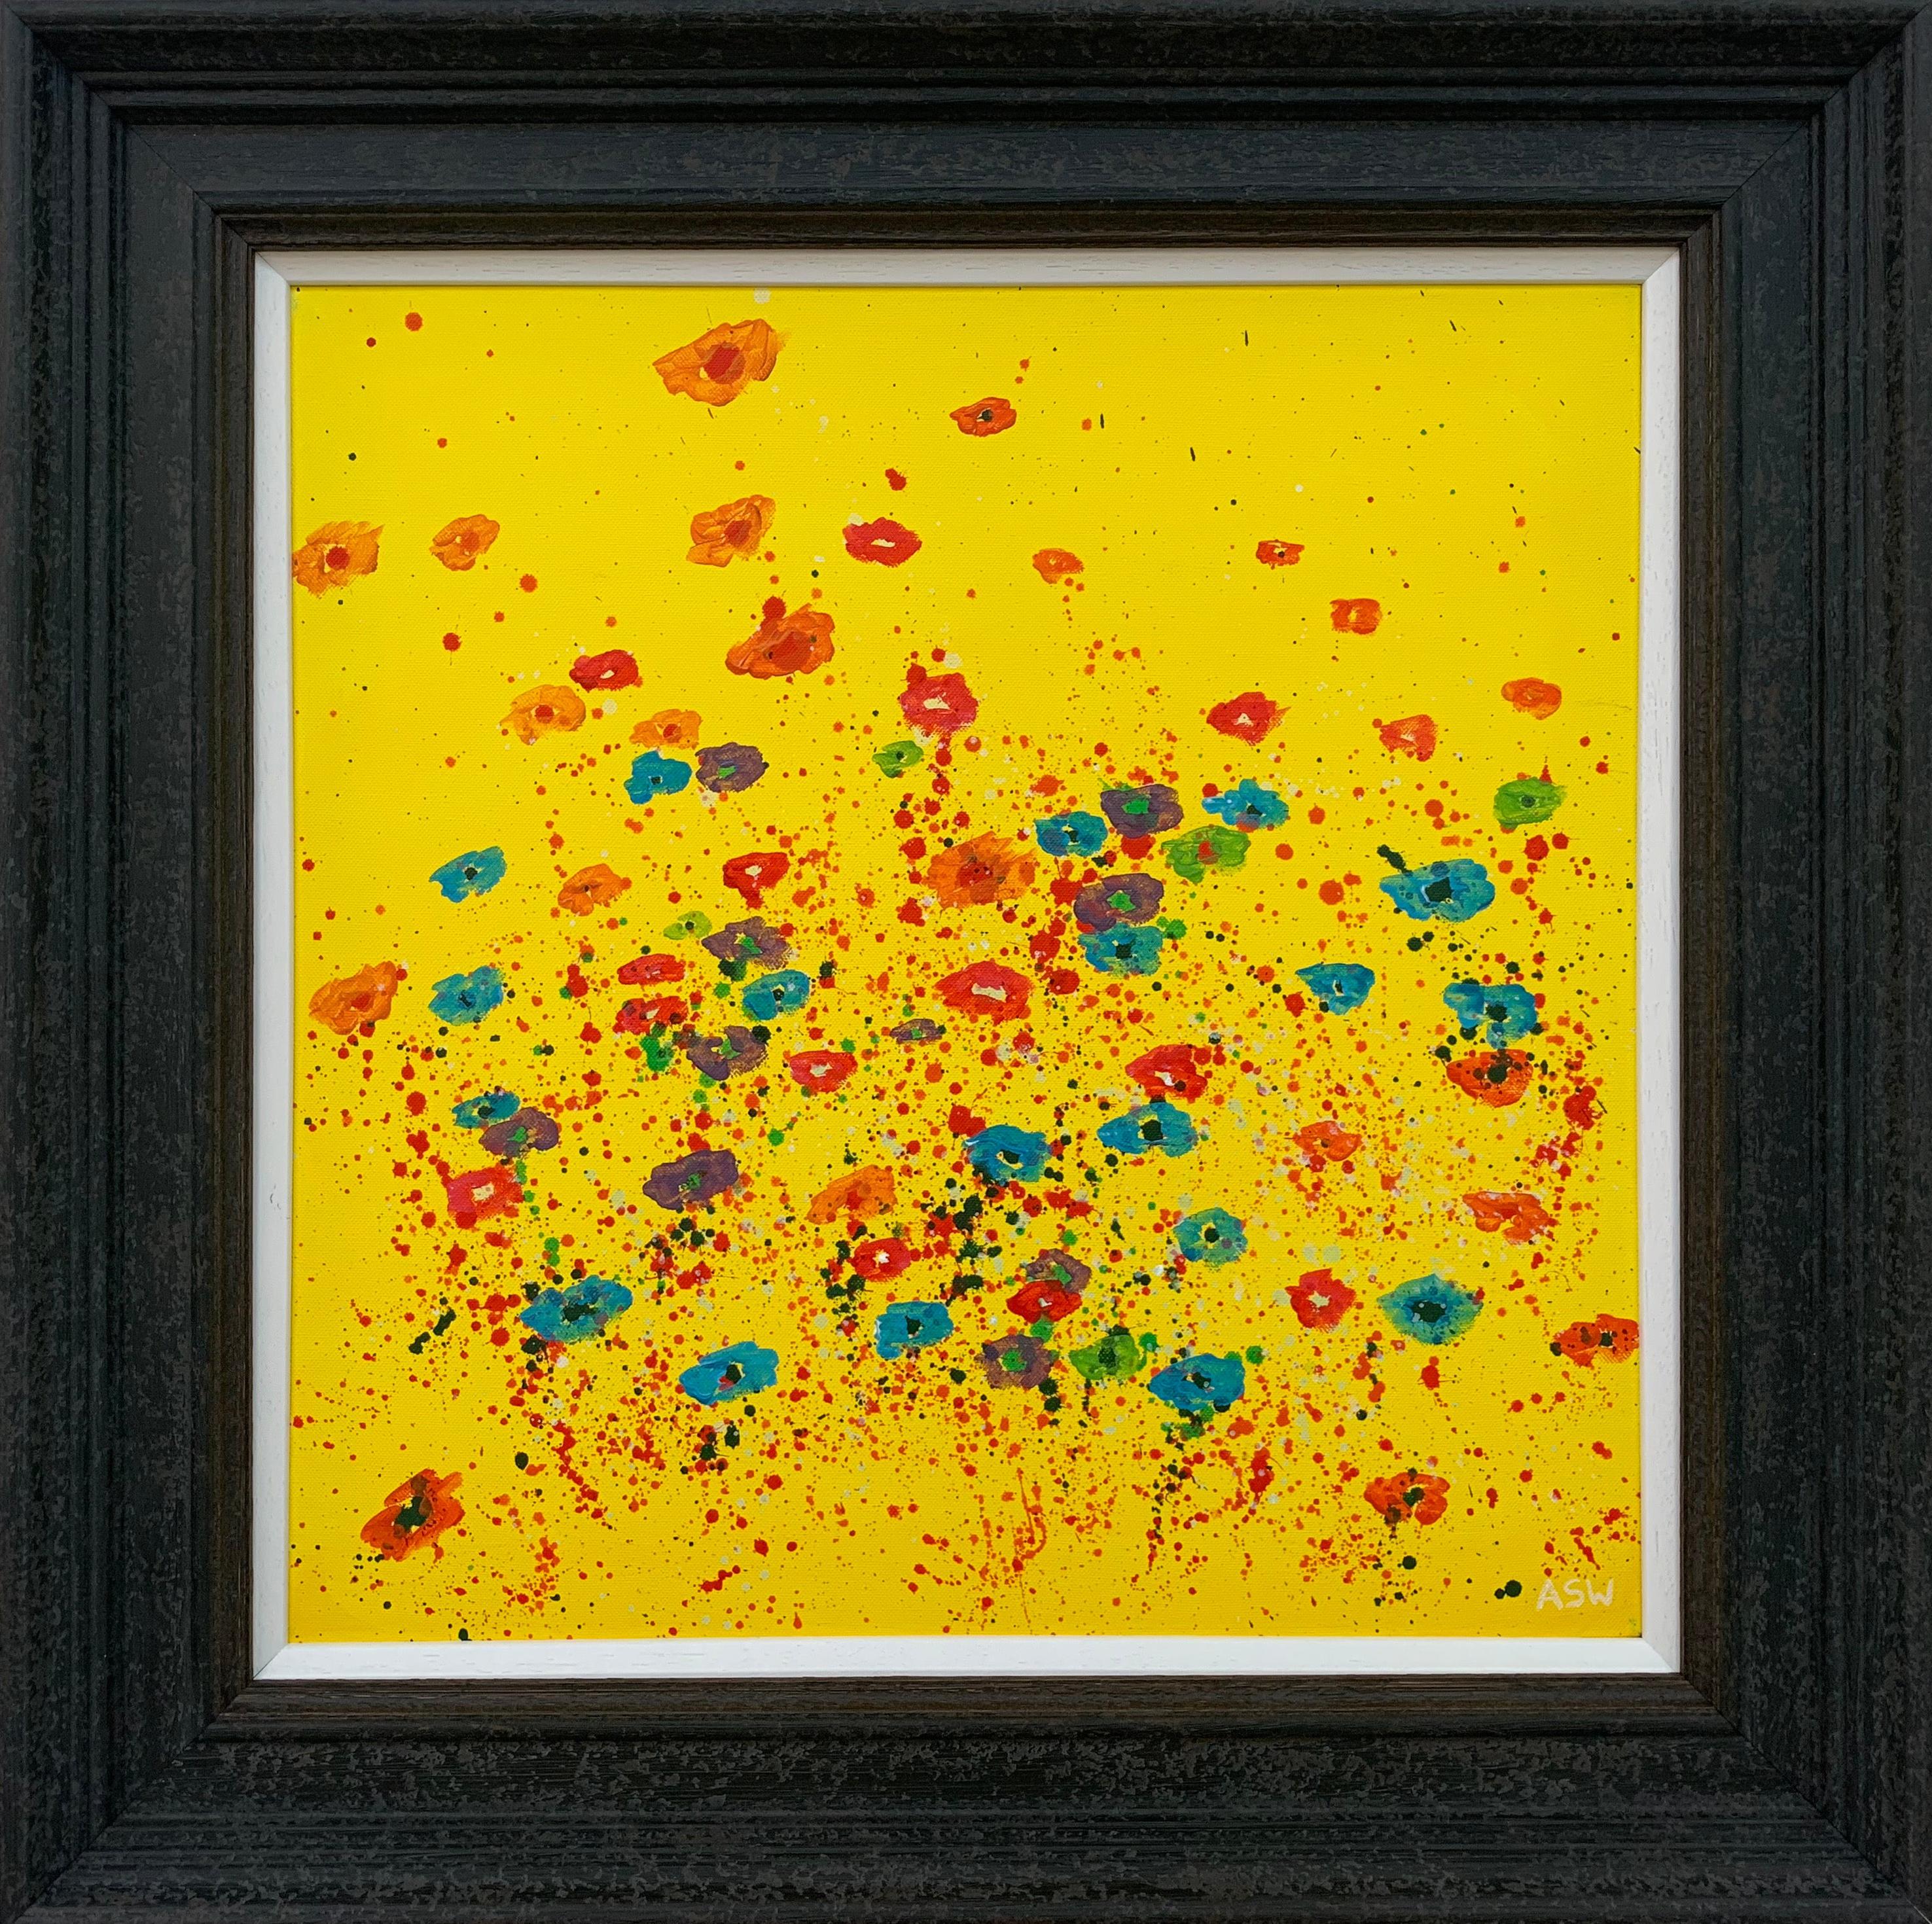 Abstract Red Pink Blue Flowers on Yellow Background by British Landscape Artist